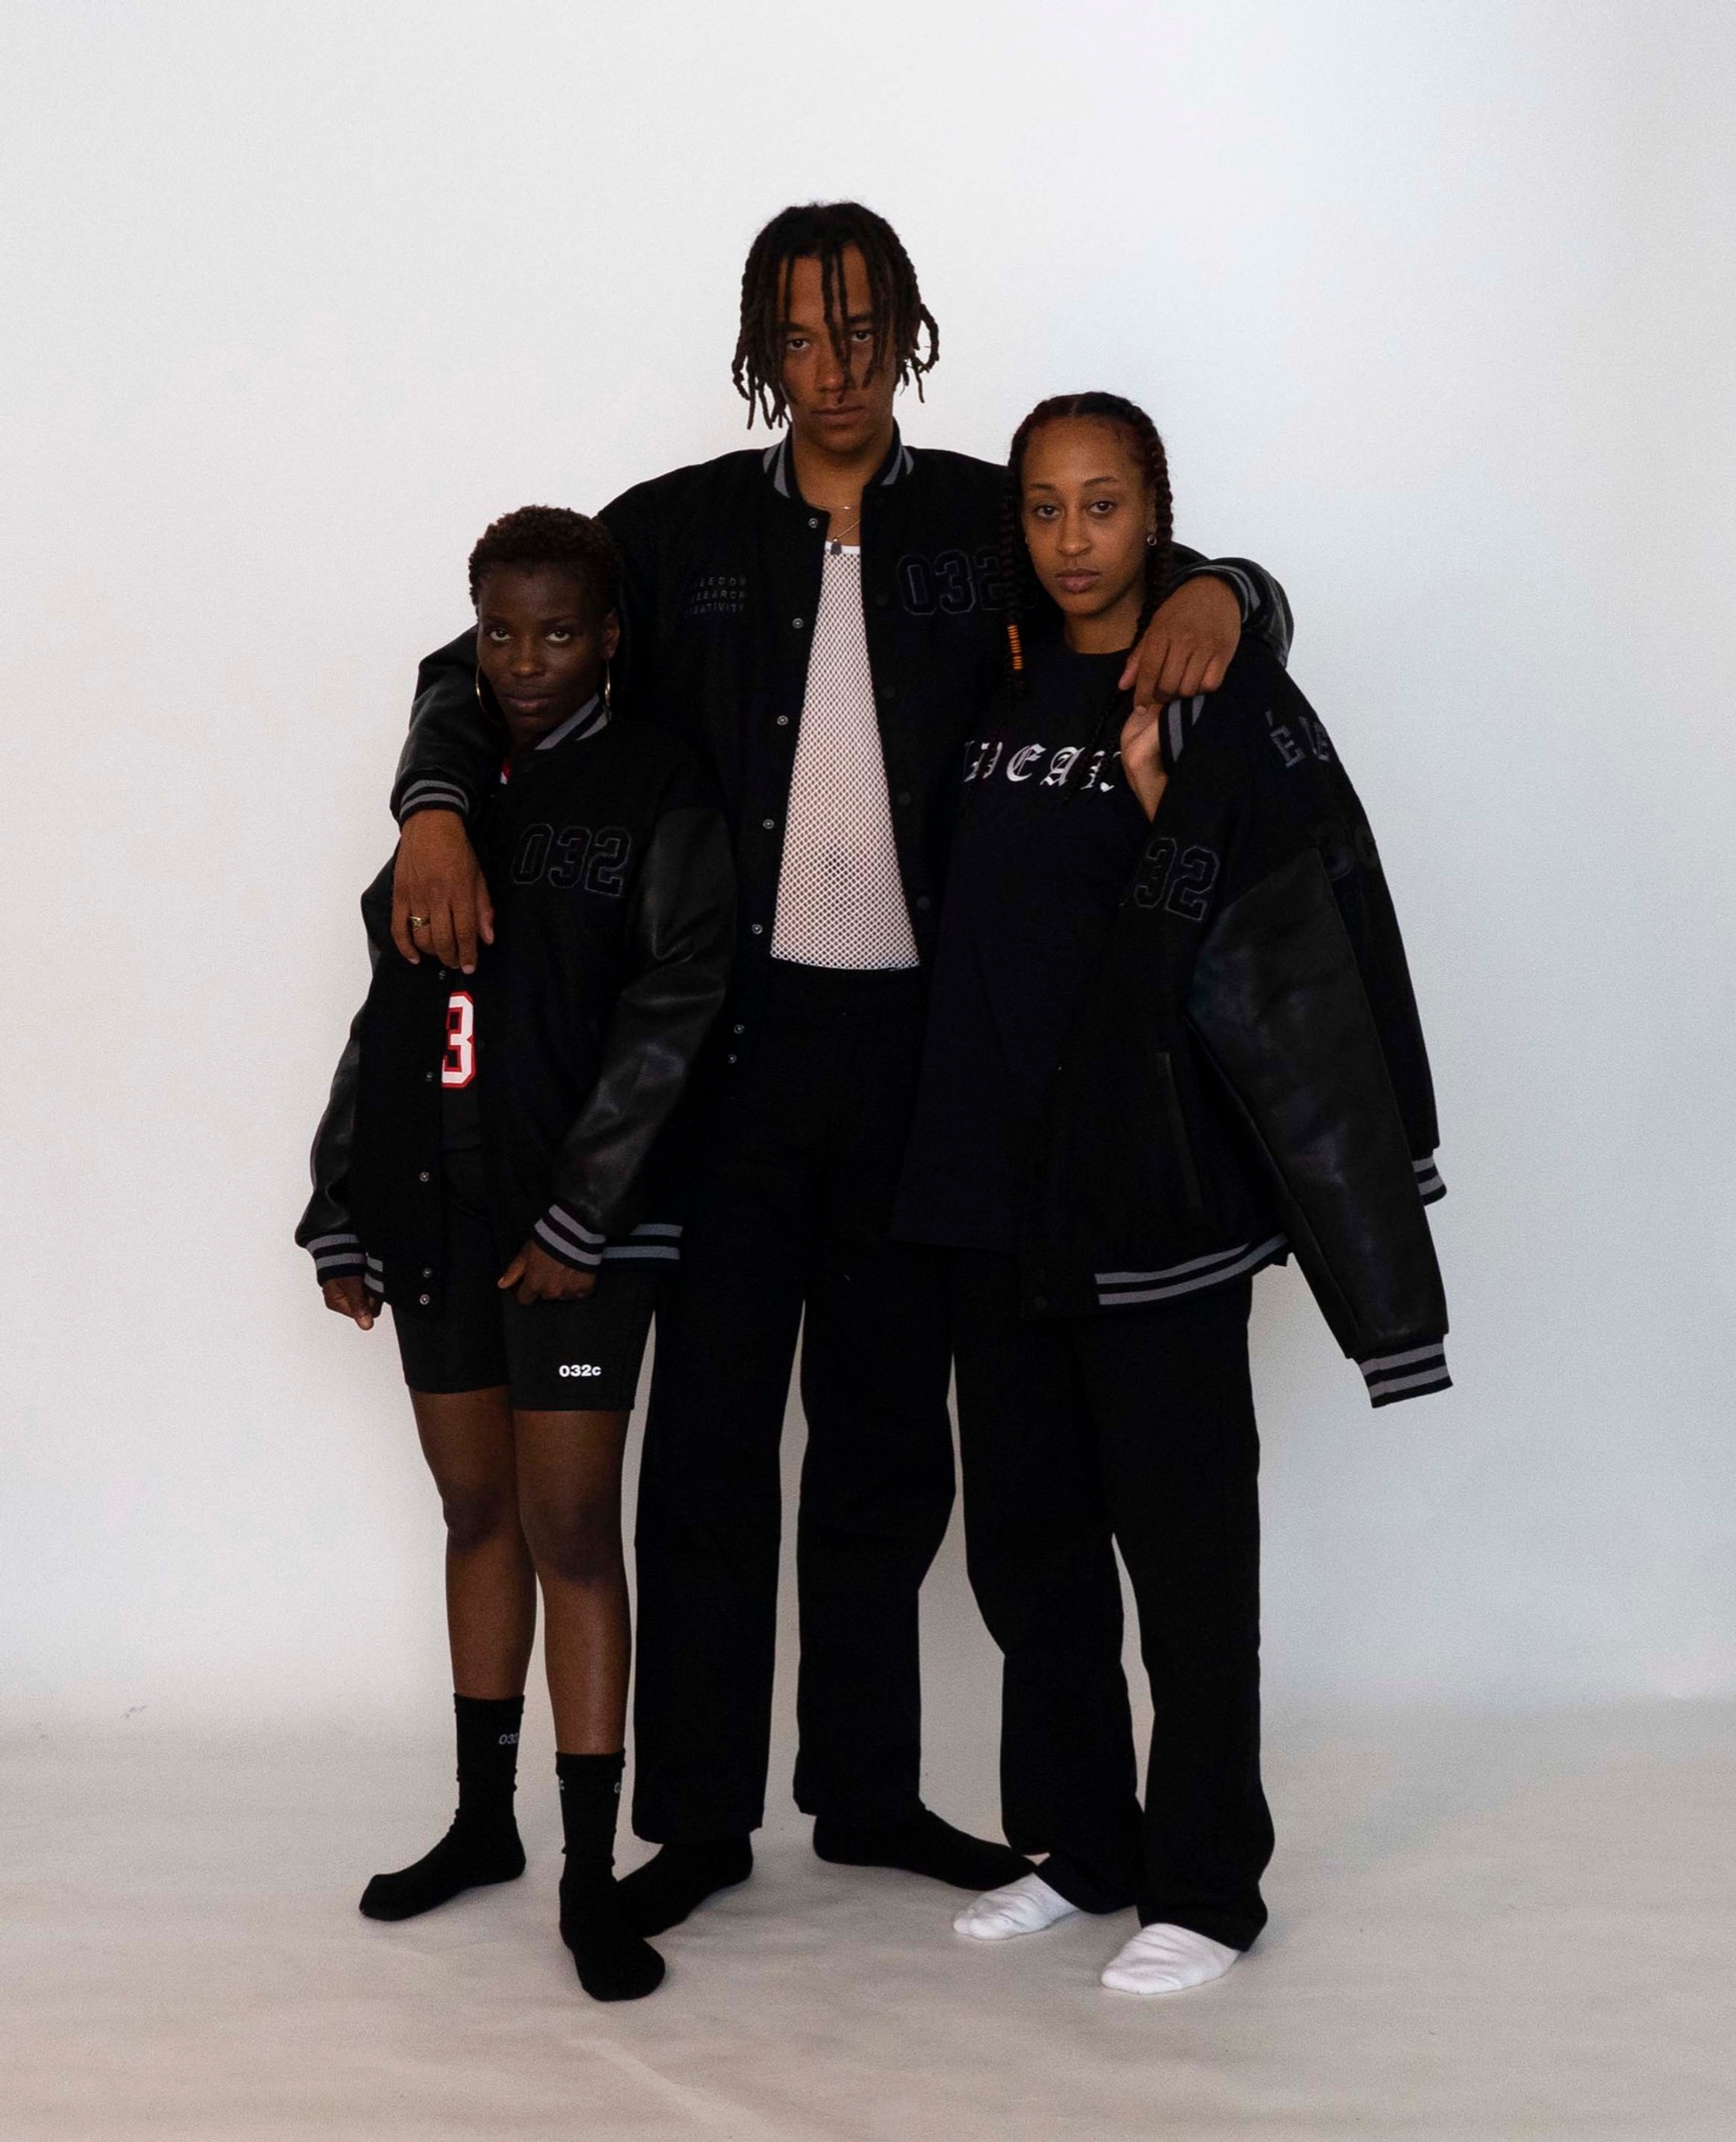 Mariama, Buyegi and Libell wear the 032c LoveSexDreams "Team Société" Varsity Jacket. Mariama pairs it with the neoprene shorts in black and the "Team Société" Football Jersey in Black. Buyegi and Libell both wear the straight leg trouser. Libell opts for the "Ideal" T-shirt, while Buyegi finishes his look with the Net tank in white